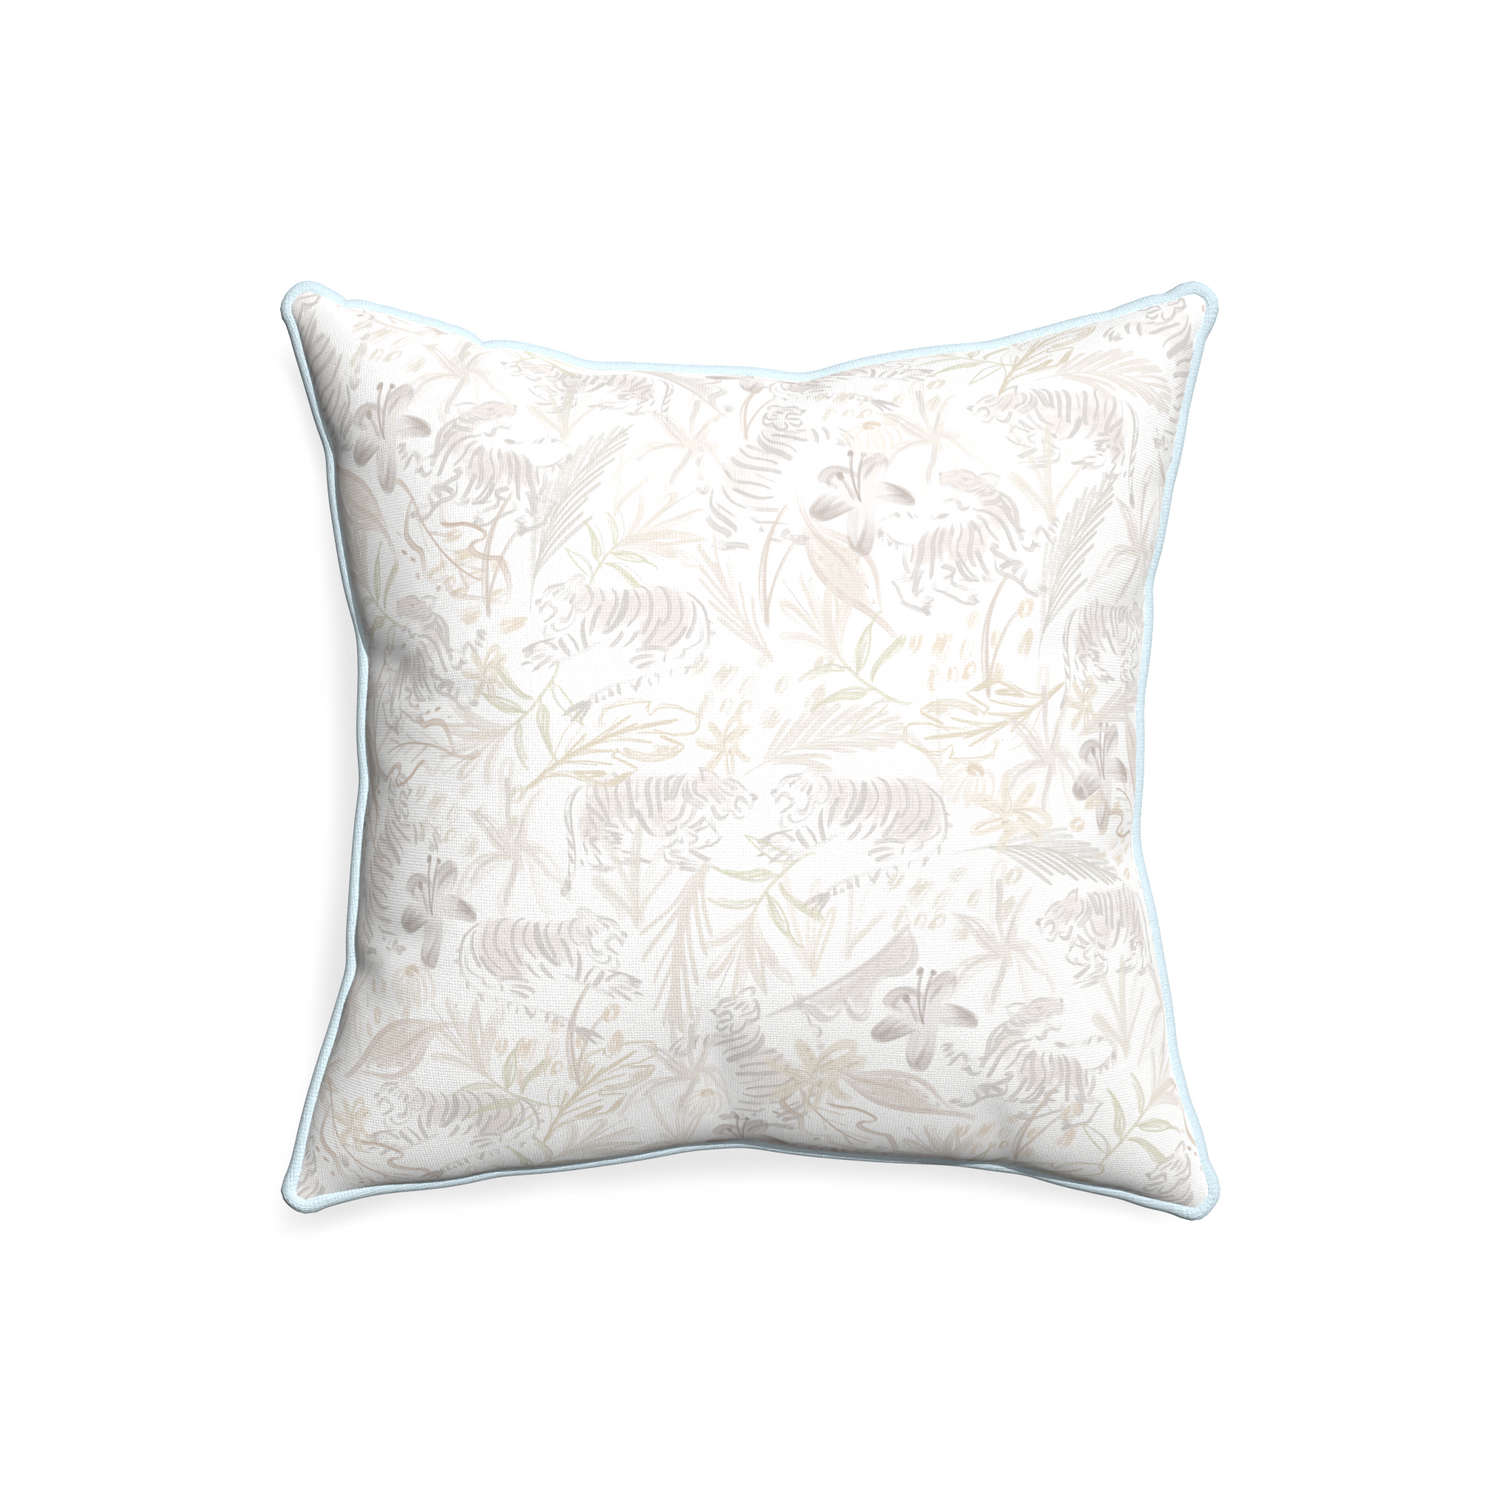 20-square frida sand custom pillow with powder piping on white background